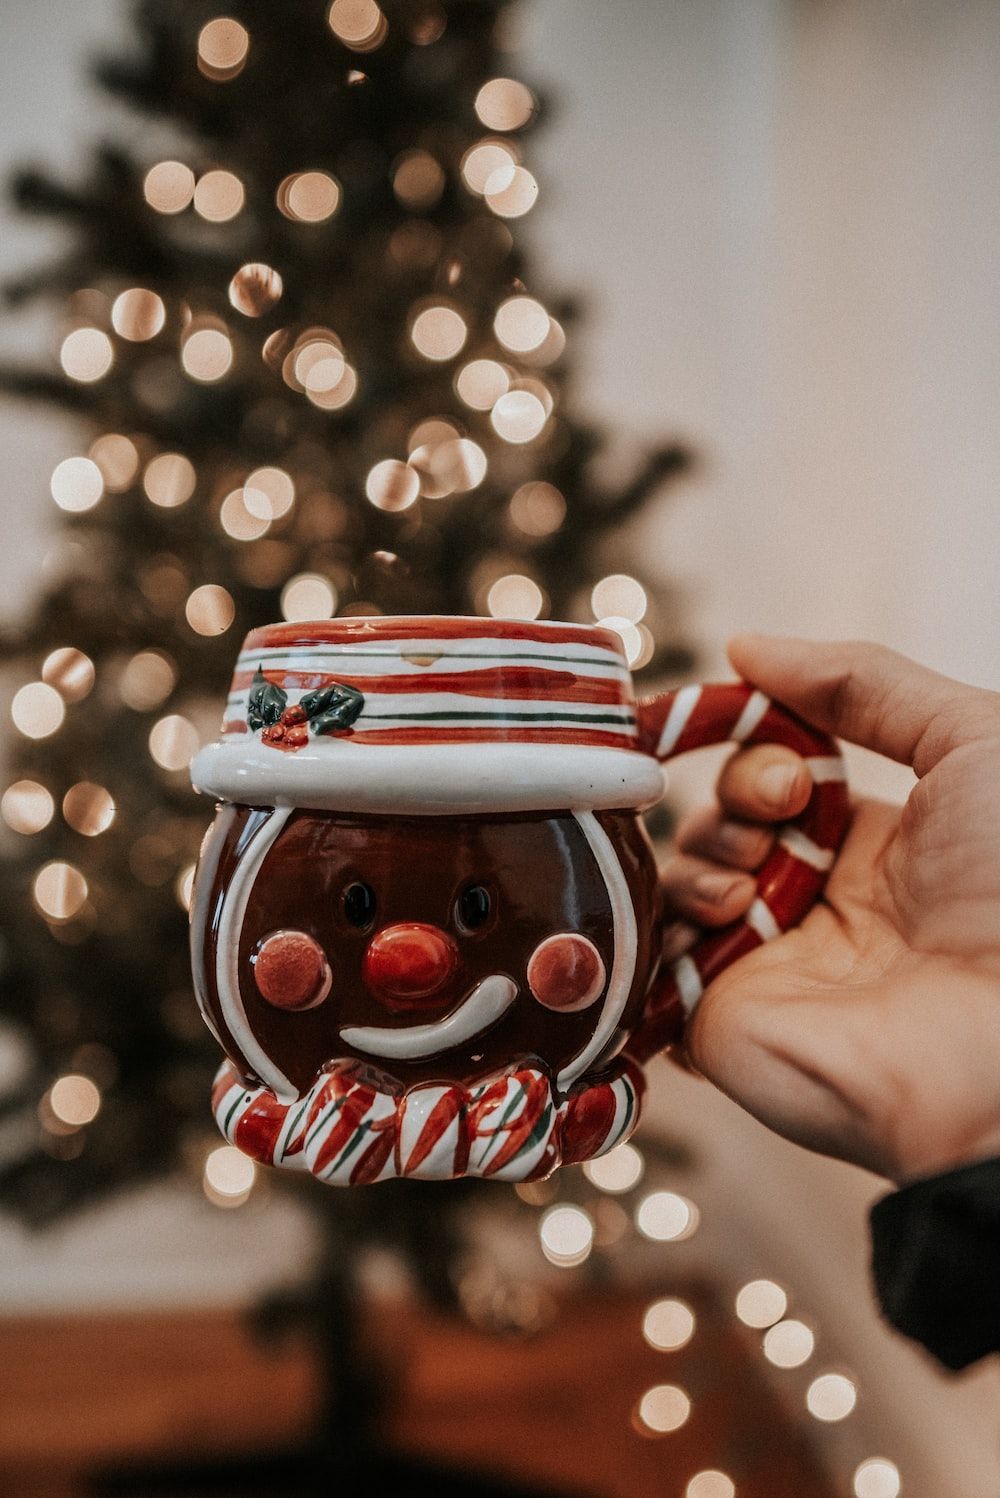 A gingerbread man mug with a candy cane handle in front of a Christmas tree. - White Christmas